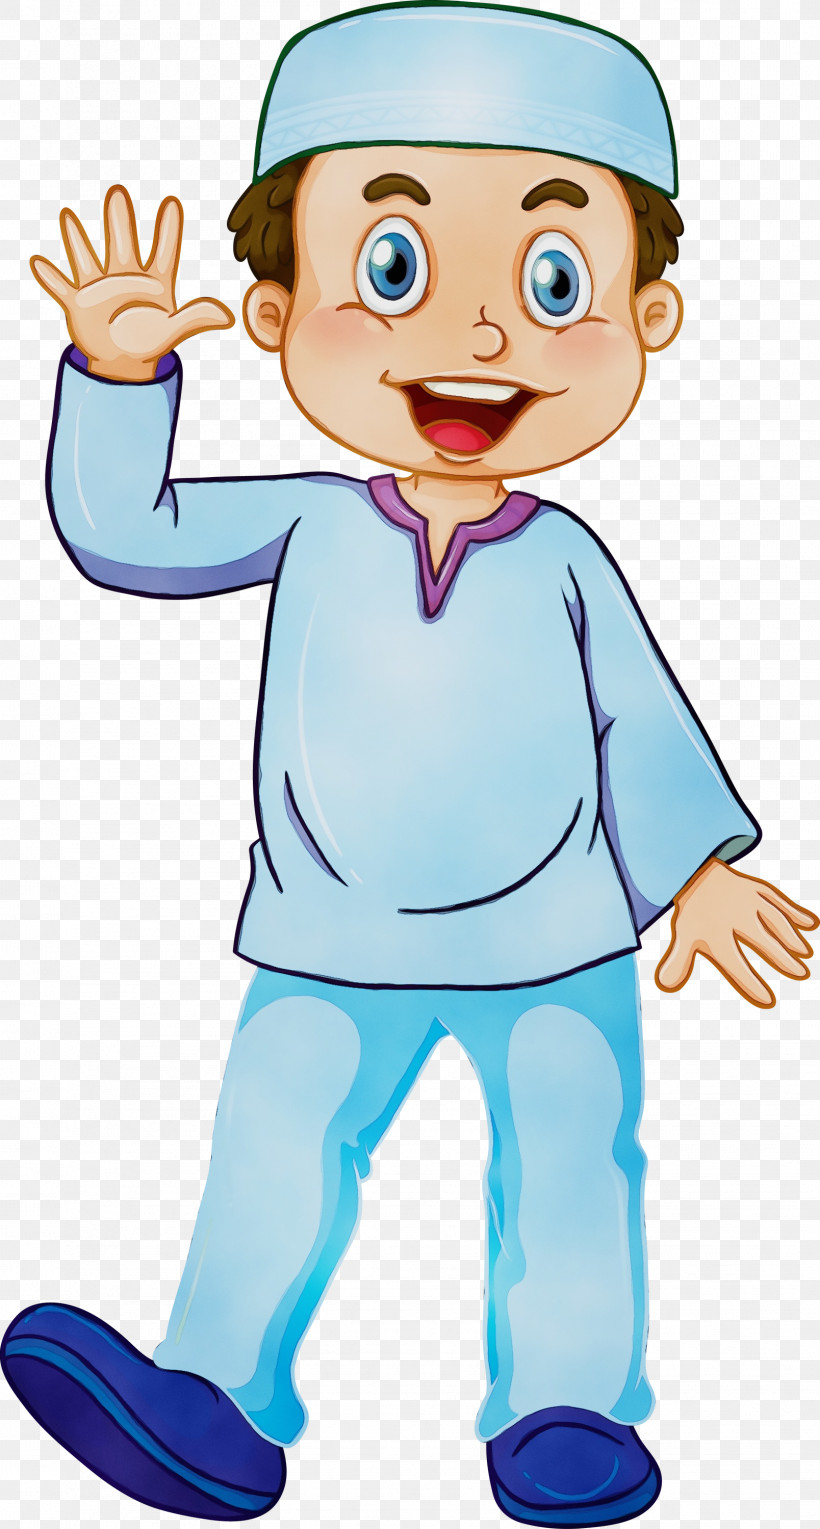 Cartoon Finger Child Toddler Thumb, PNG, 1608x3000px, Muslim People, Cartoon, Child, Finger, Gesture Download Free